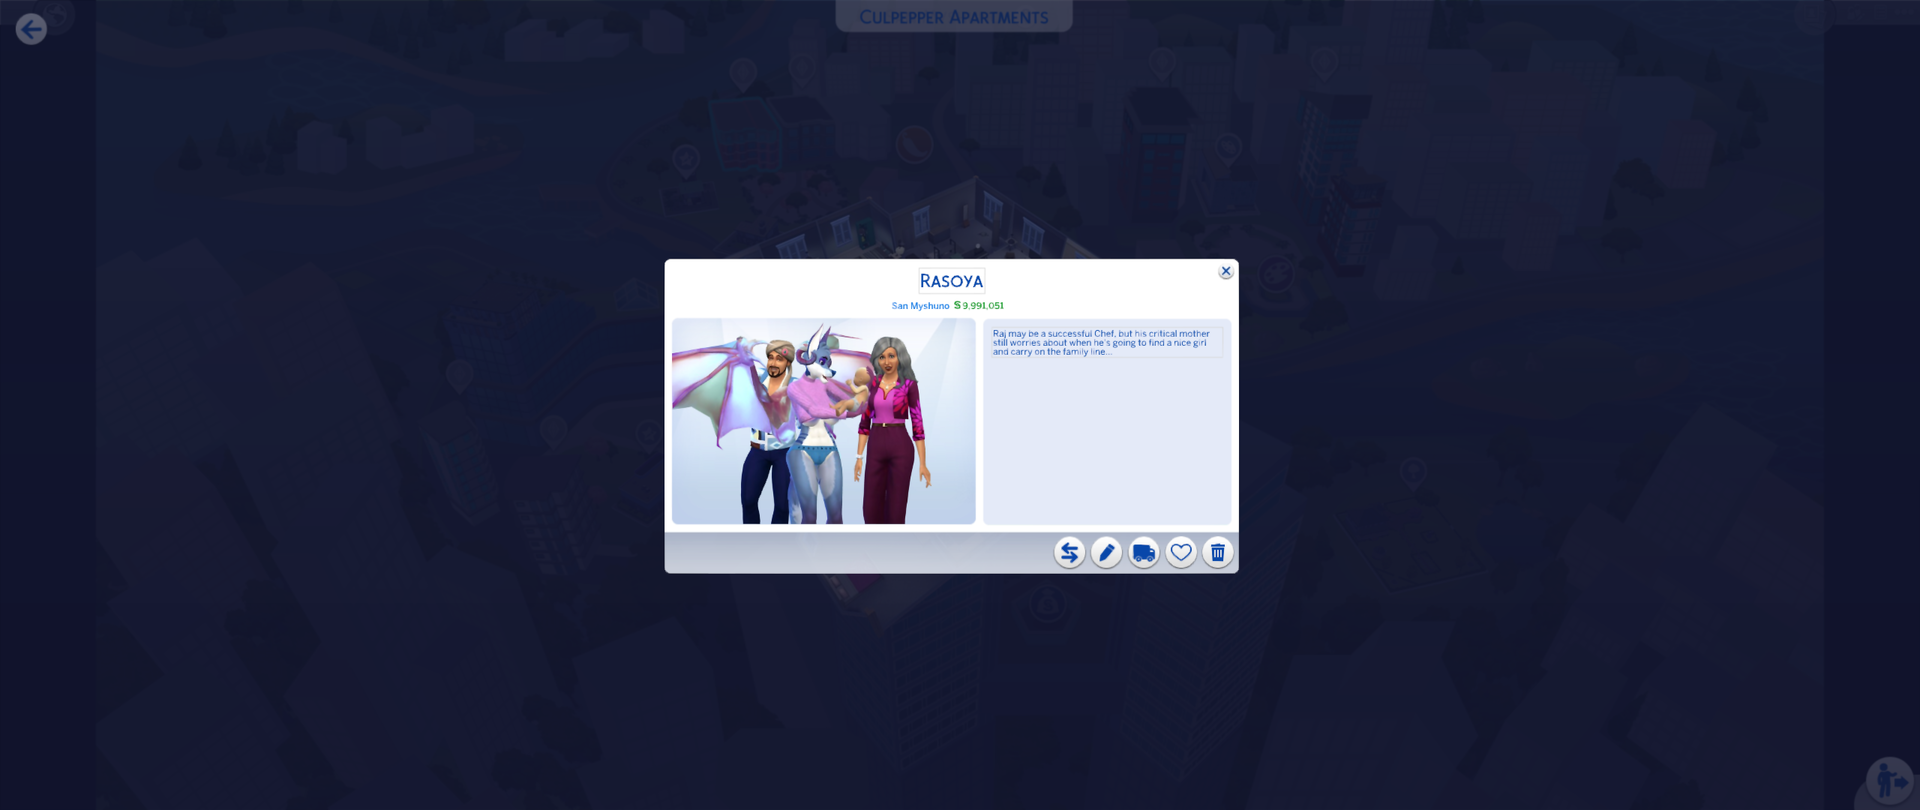 623012969_Sims4Screenshot2020_12.05-15_42.06_12.thumb.png.eb0b7d46ab0e4c5a17460e6ef78098d8.png